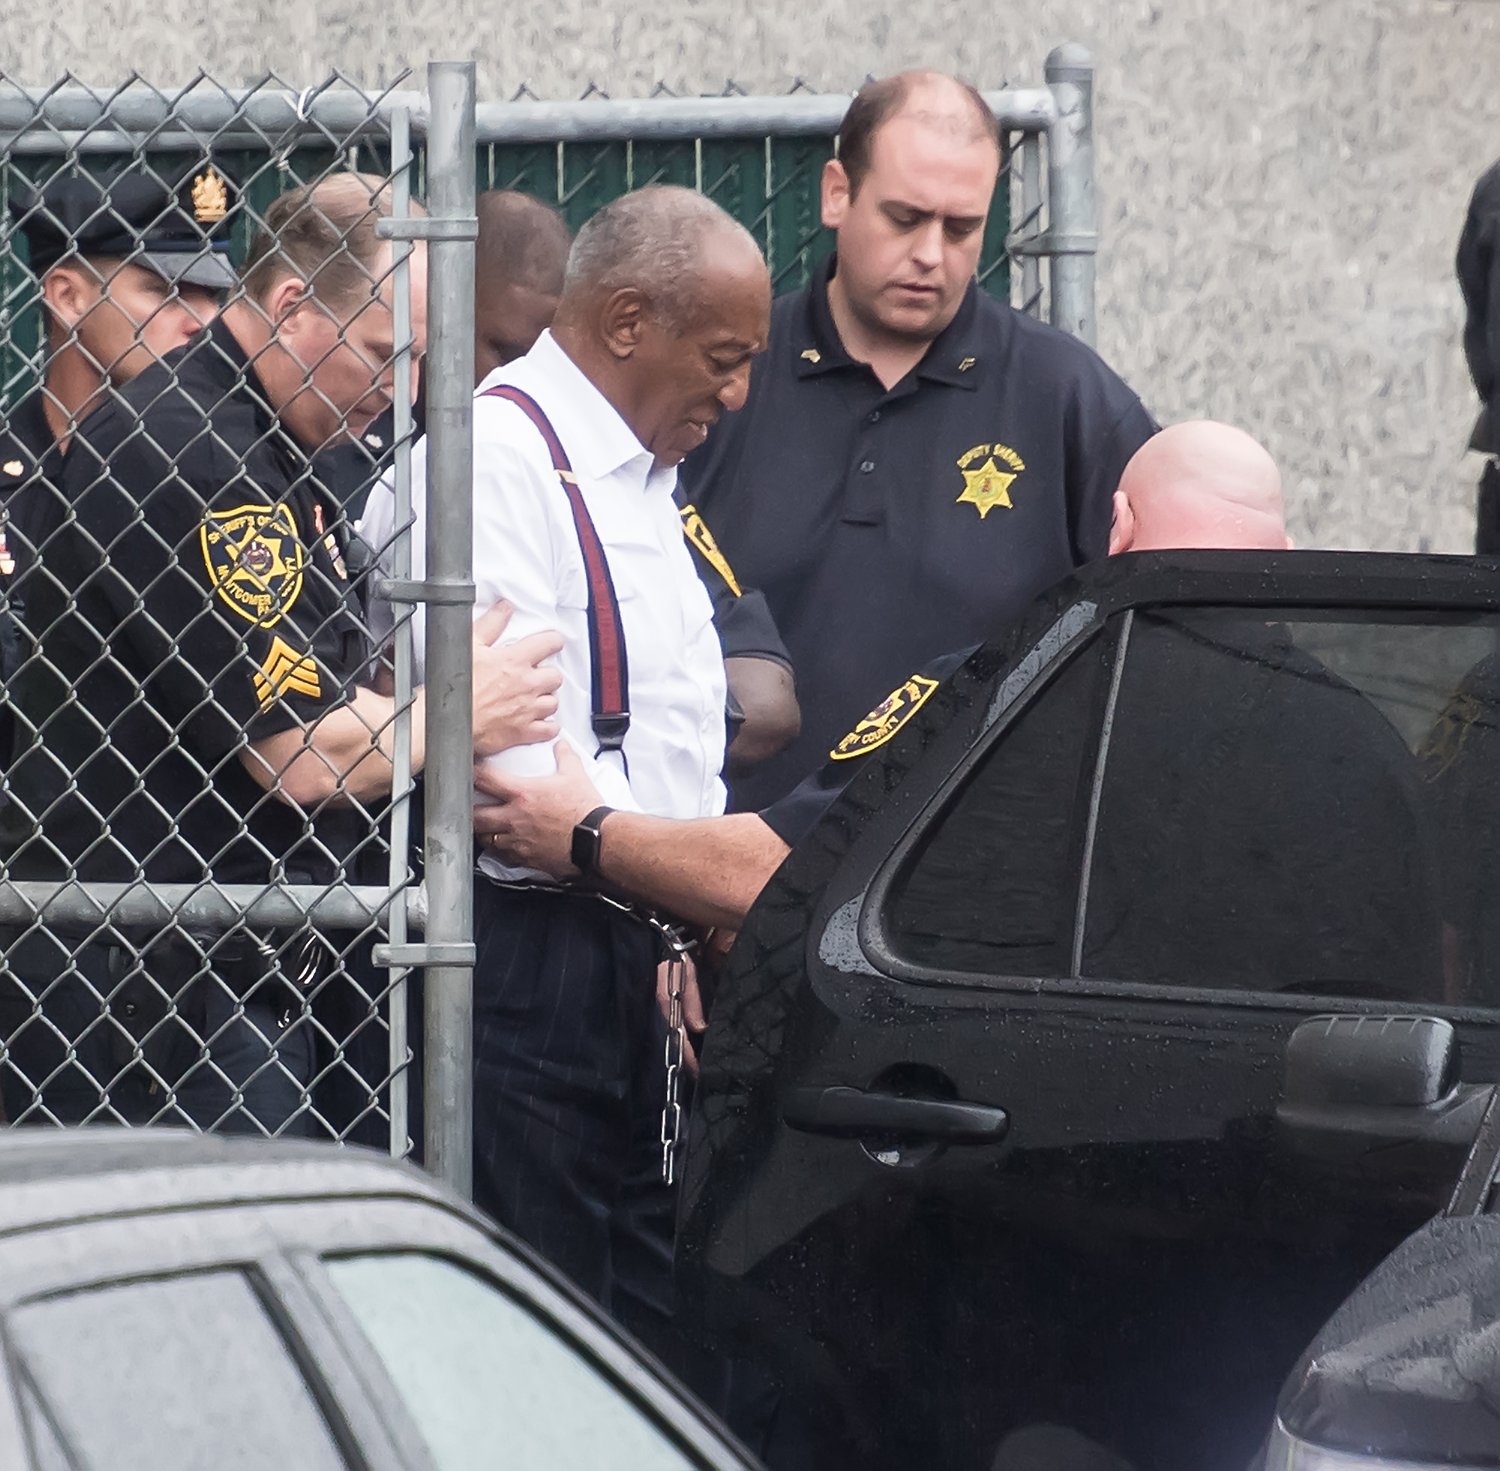  Bill Cosby is taken out of to the Montgomery County Courthouse to state prison in shackles at the Montgomery County Courthouse on September 25, 2018. | Photo: GettyImages 